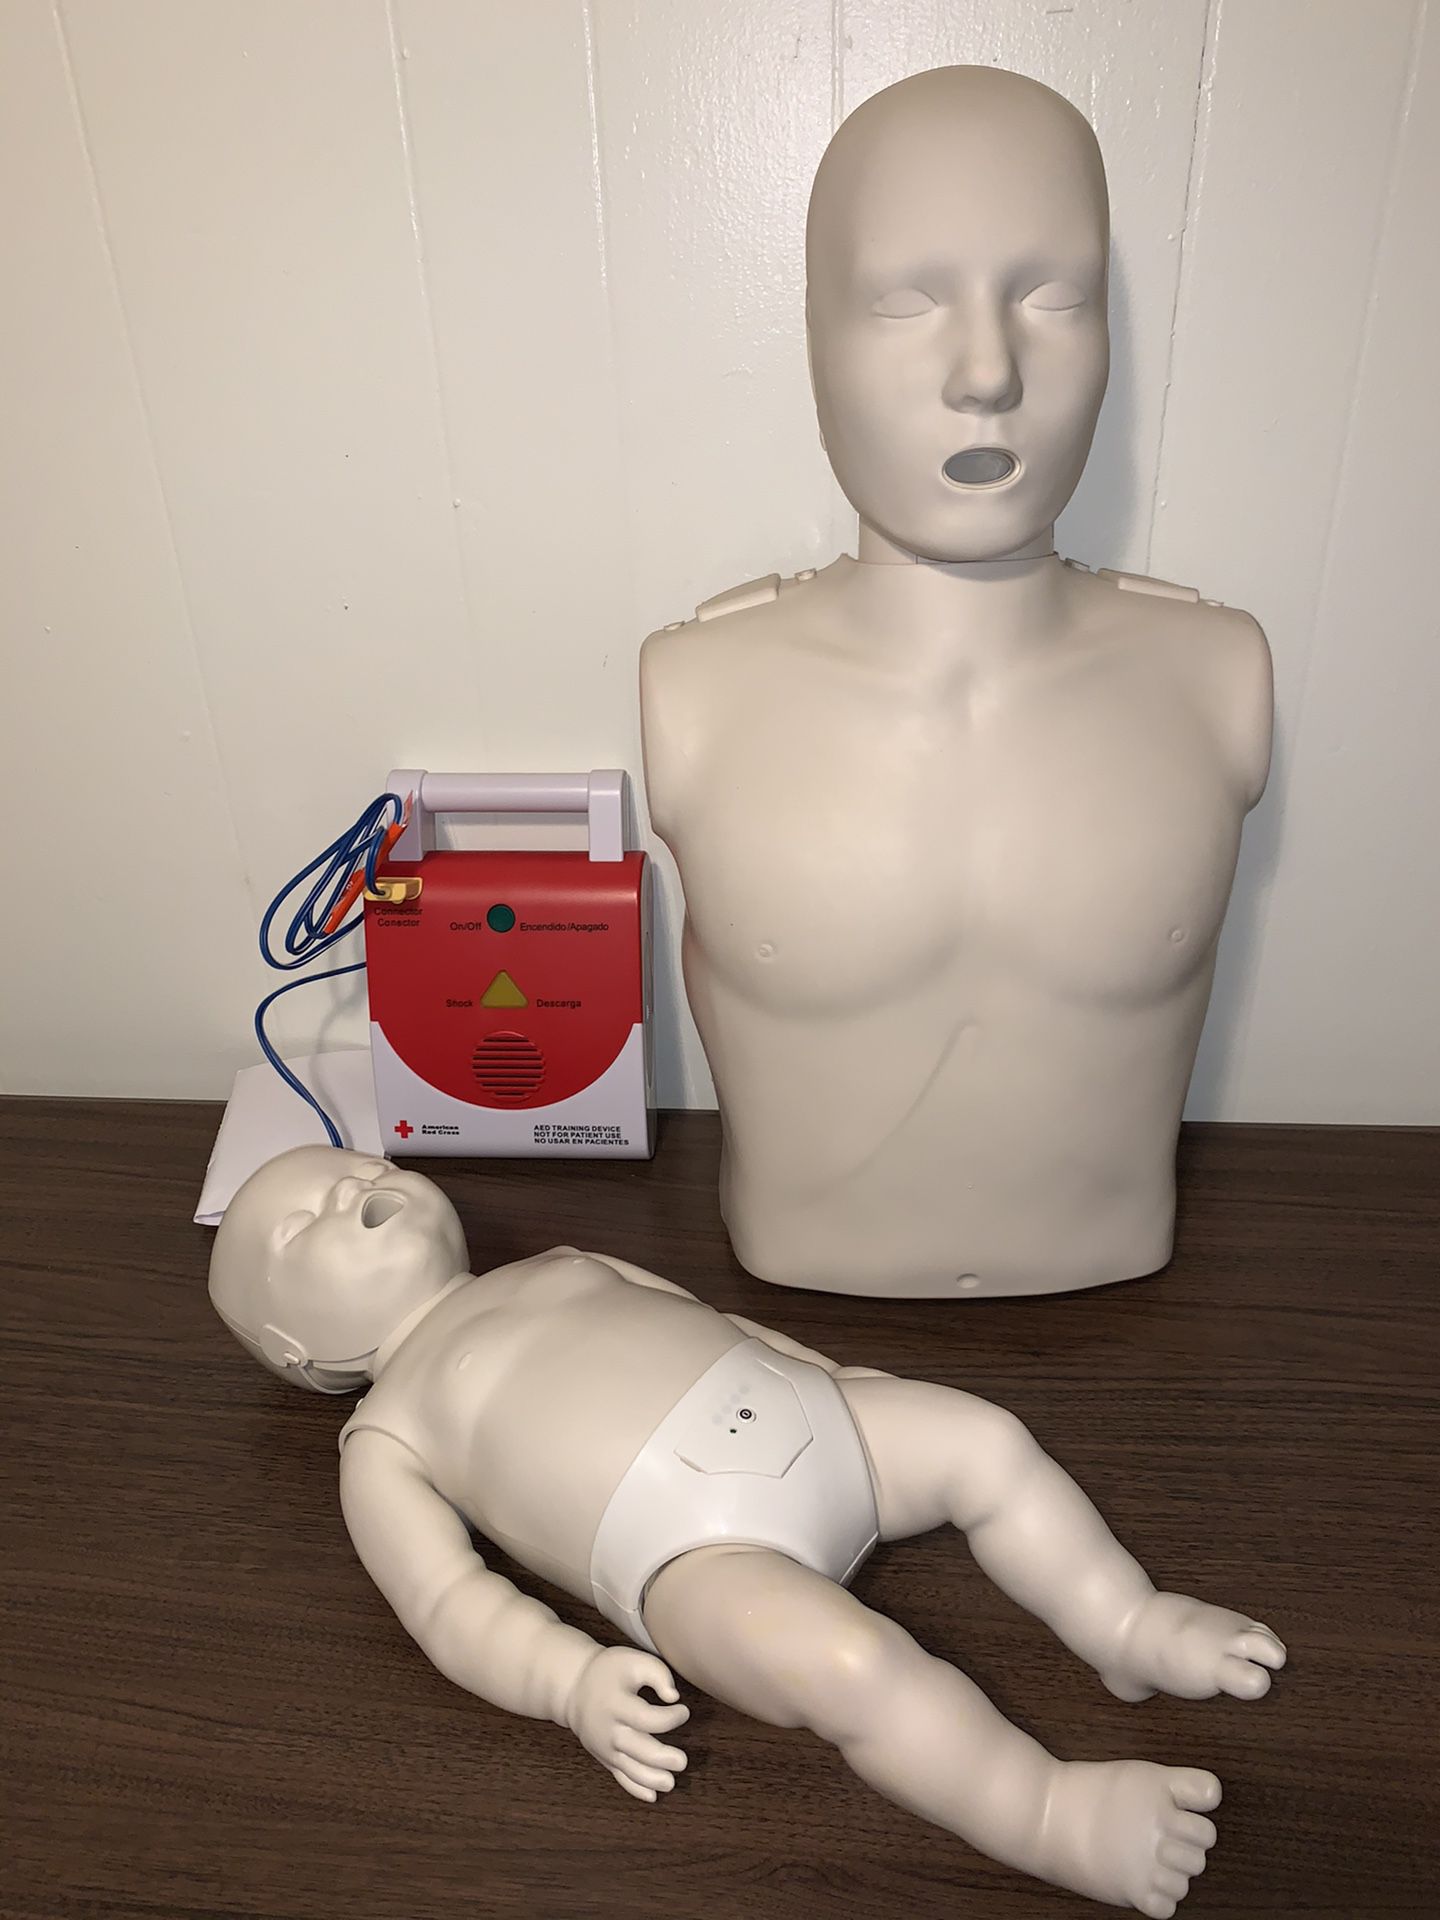 CPR/AED - 3 sets